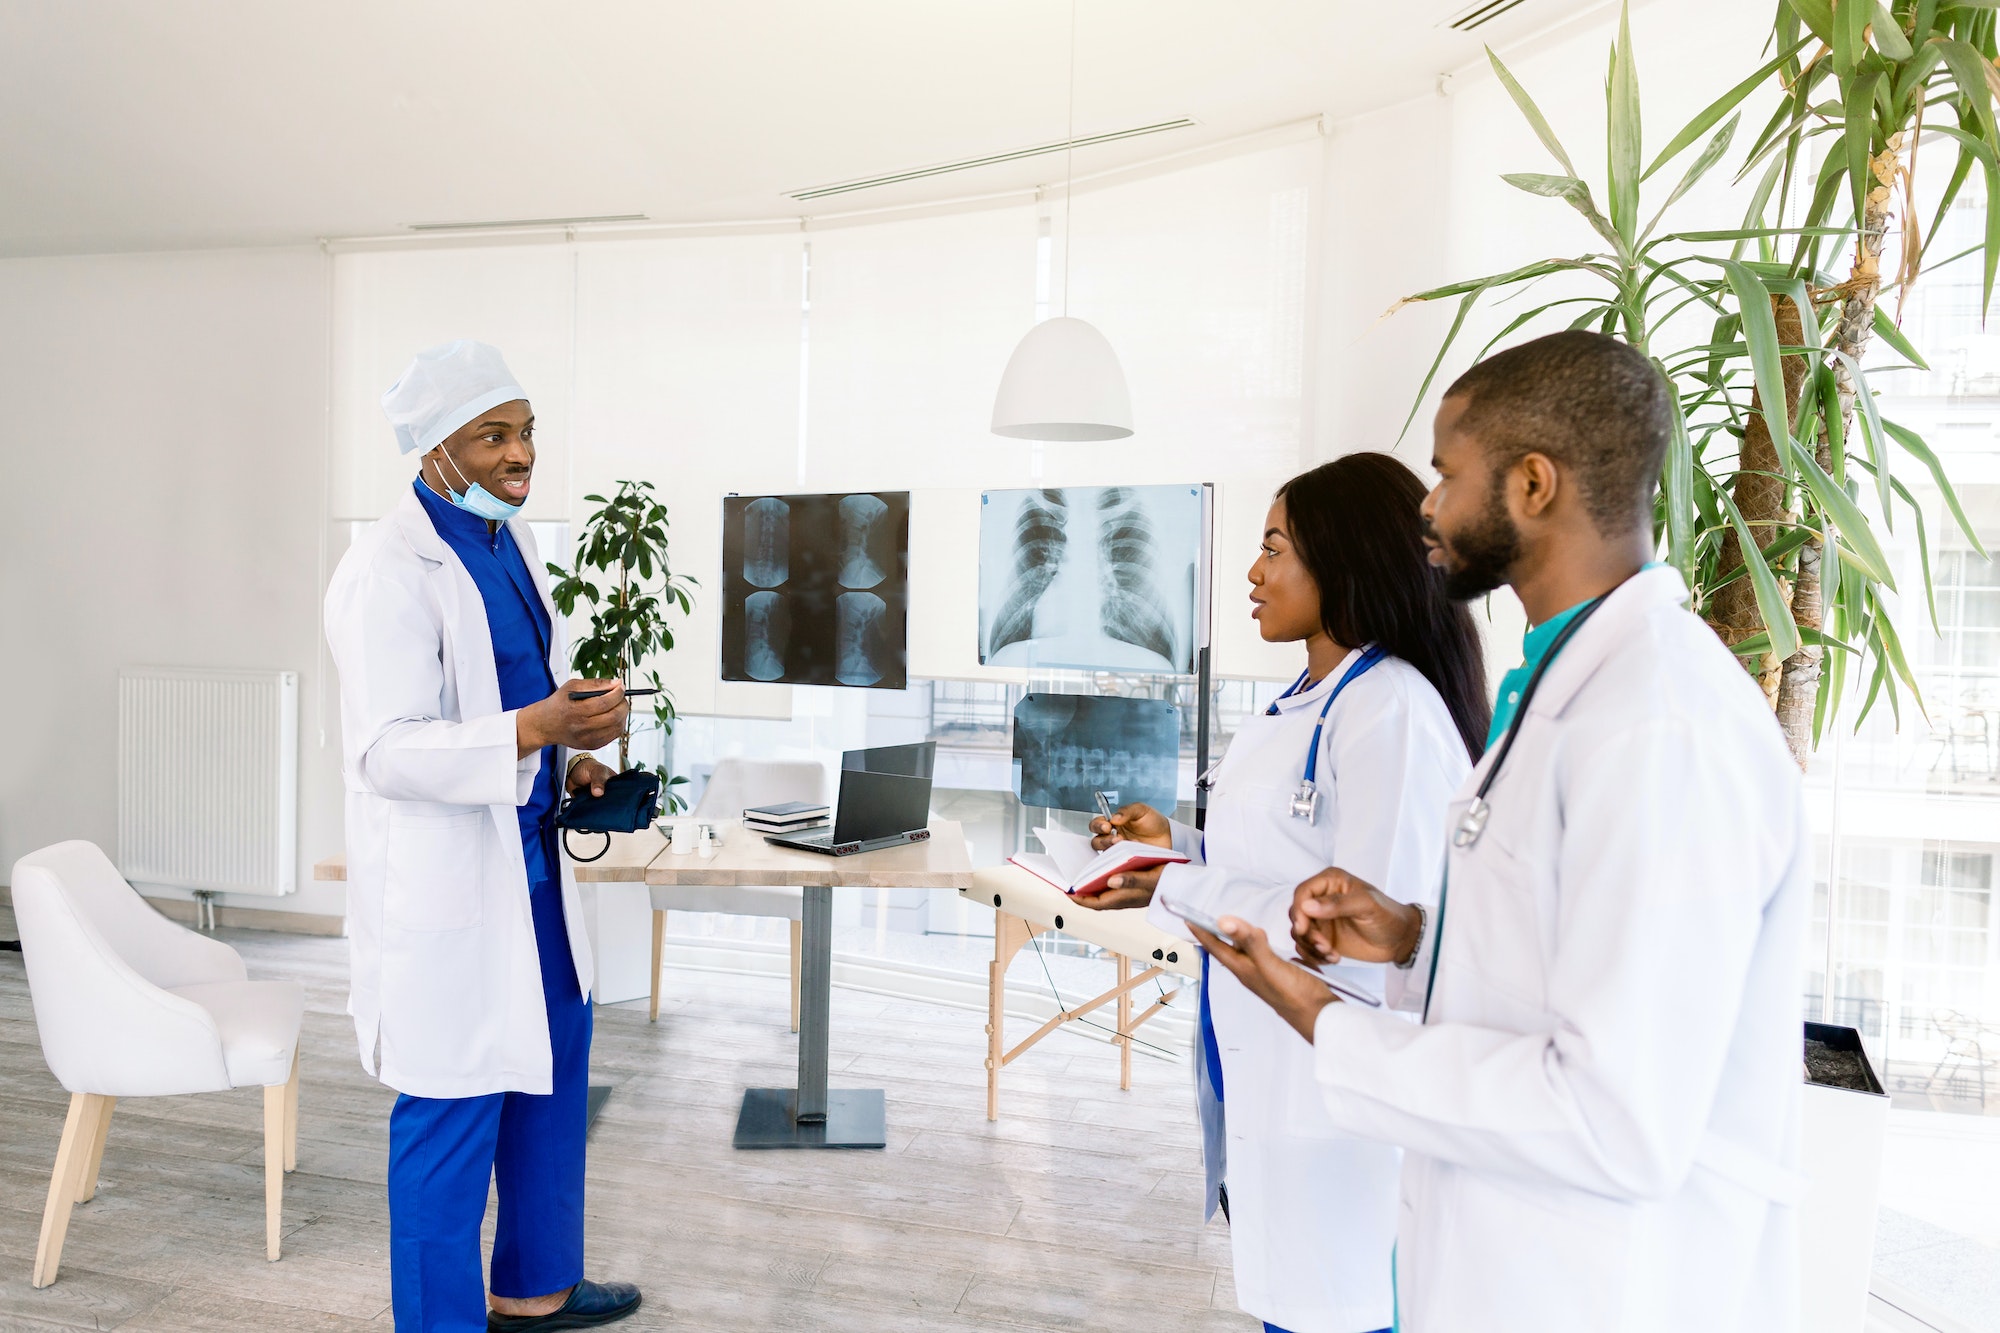 profession, people, surgery, radiology and medicine concept - group of doctors discussing x-rays of